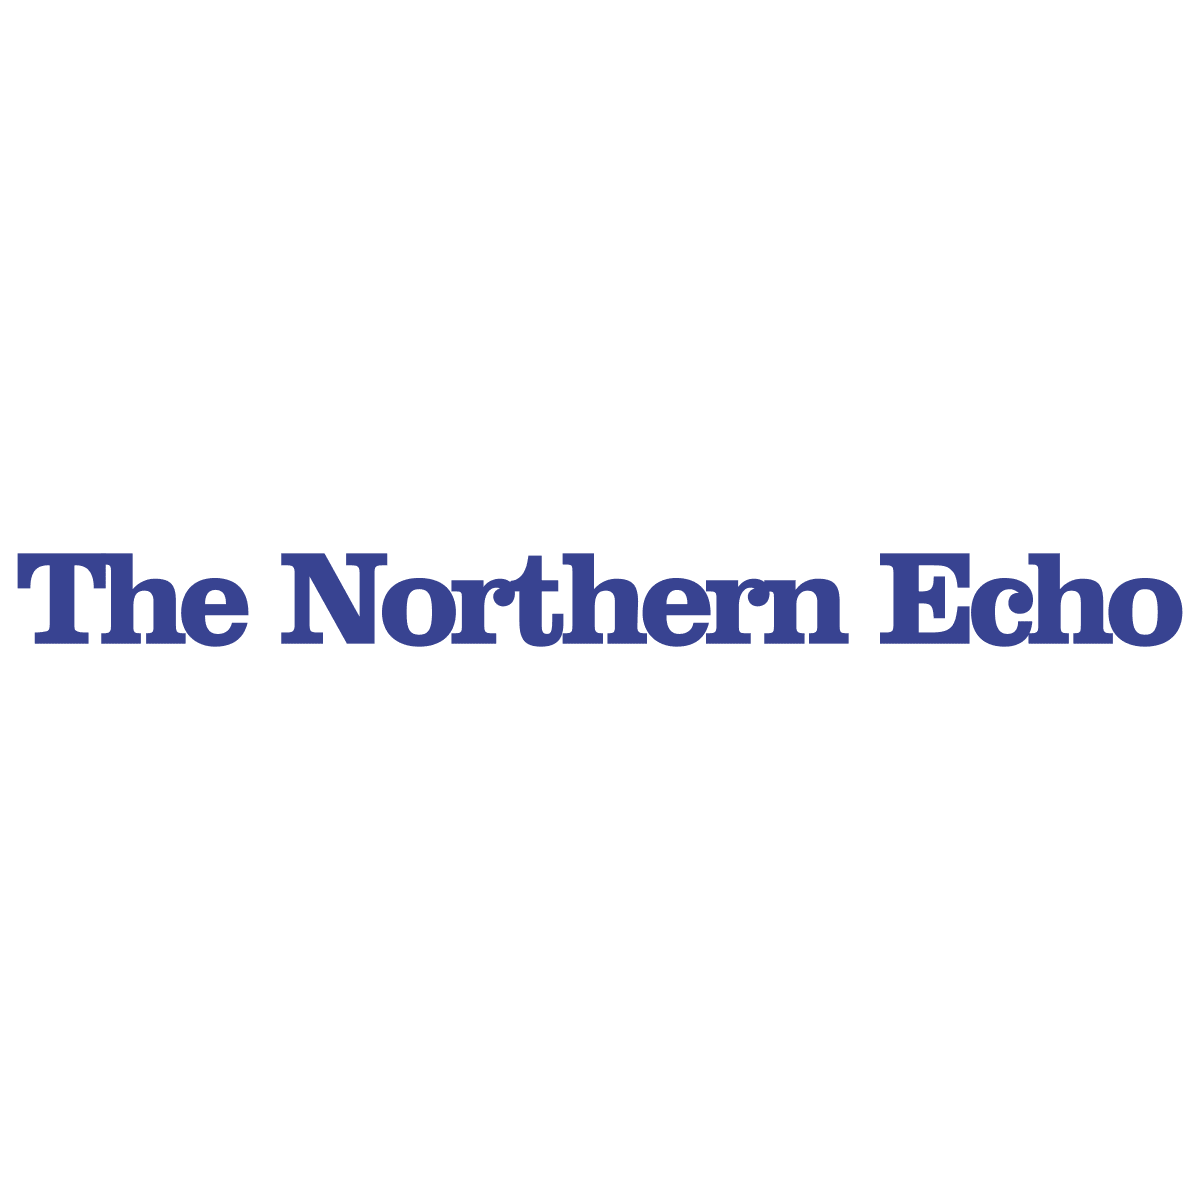 The Northern Echo, HD, logo, png